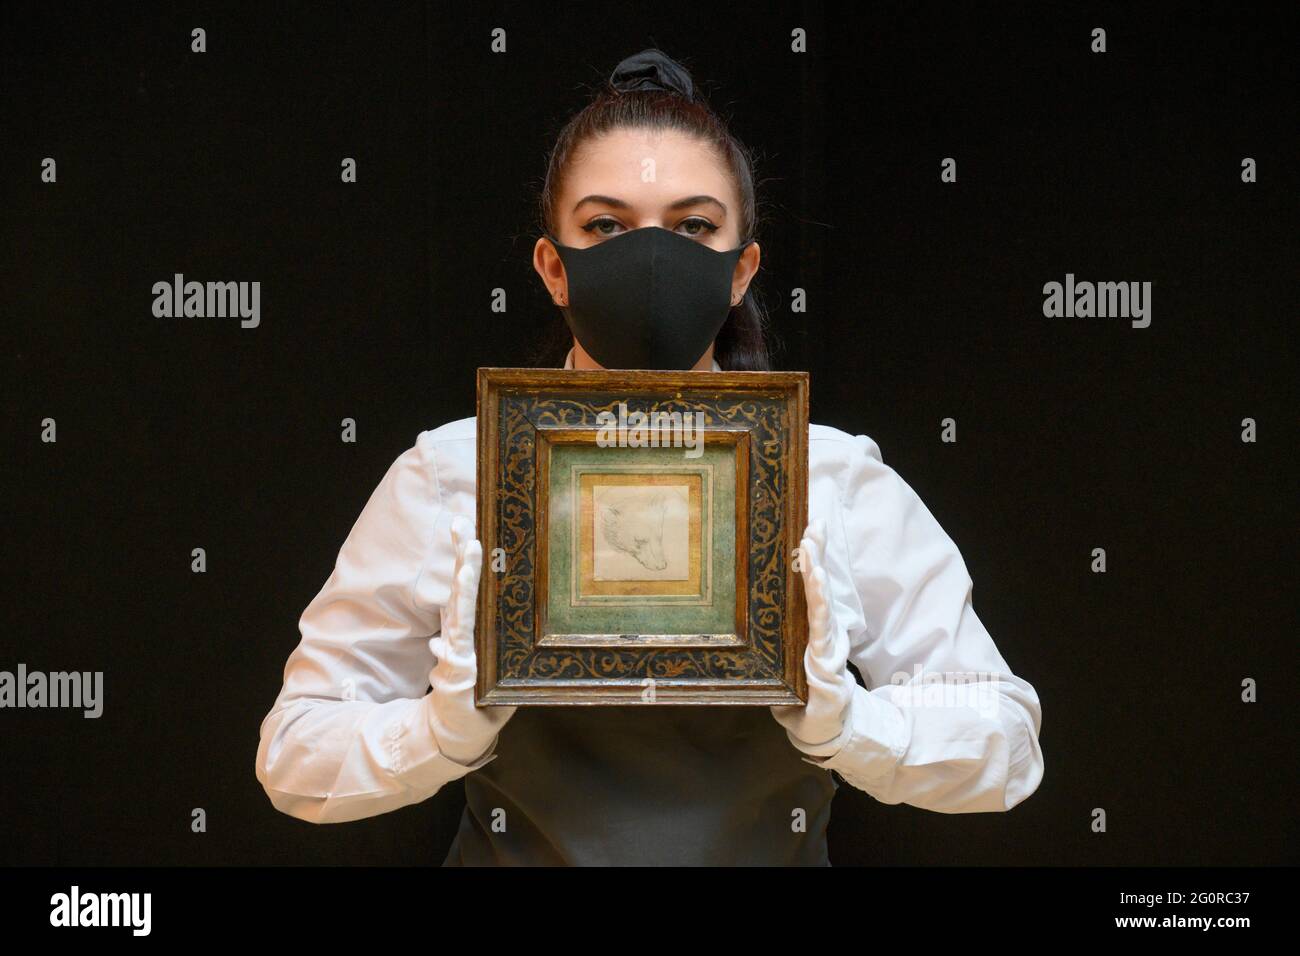 Christie’s, London, UK. 3 June 2021. On 8 July Leonardo da Vinci’s Head of a Bear drawing will be offered for sale, estimate £8,000,000-12,000,000, held by Christie’s art handler at the press preview. Credit: Malcolm Park/Alamy Live News. Stock Photo